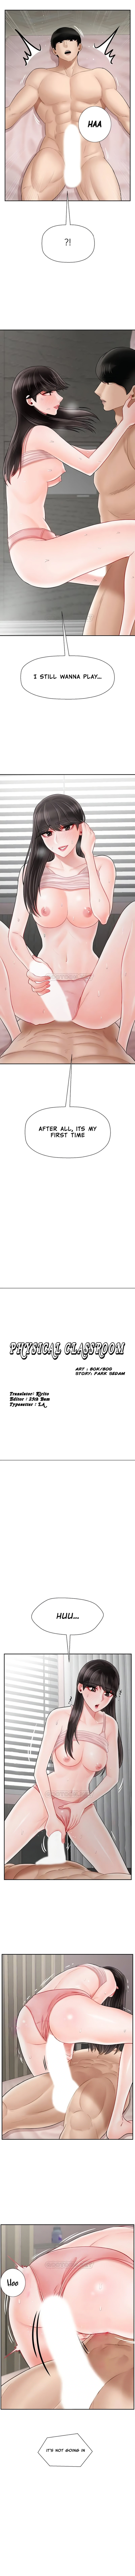 Physical Classroom - Chapter 39 Page 1